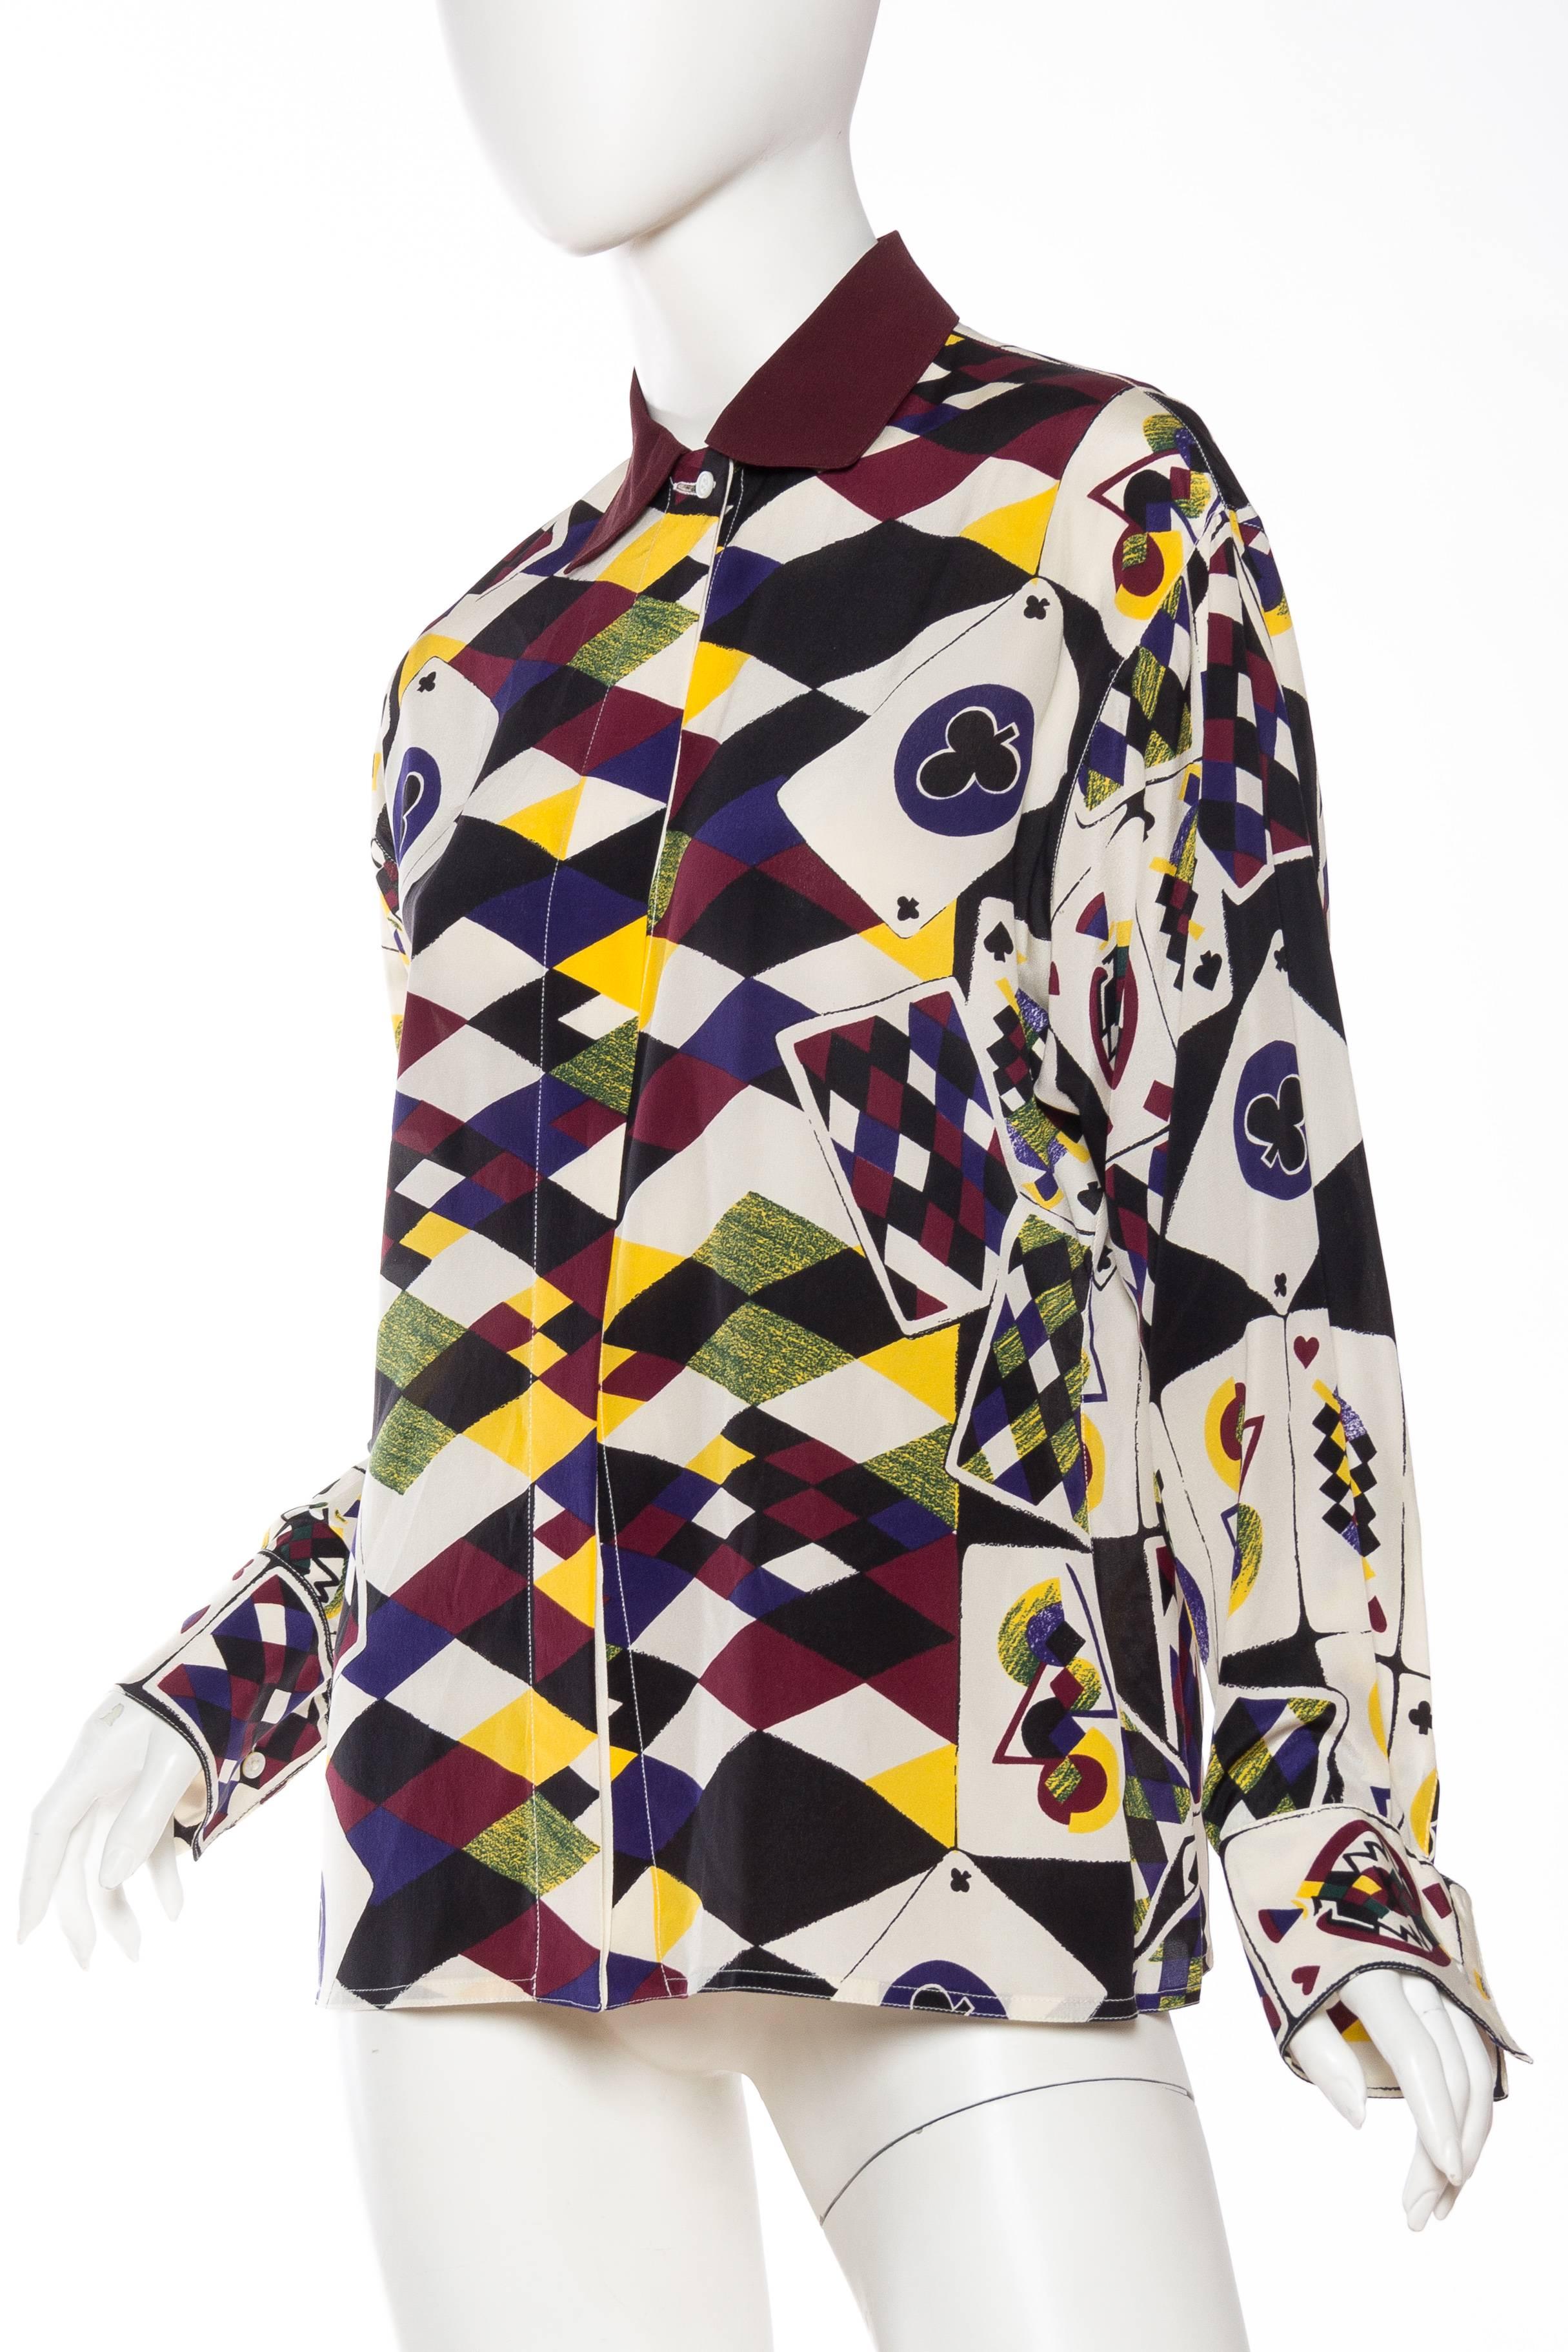 1980S GIANNI VERSACE Printed Silk Playing Card Shirt Sz 42 In Excellent Condition For Sale In New York, NY